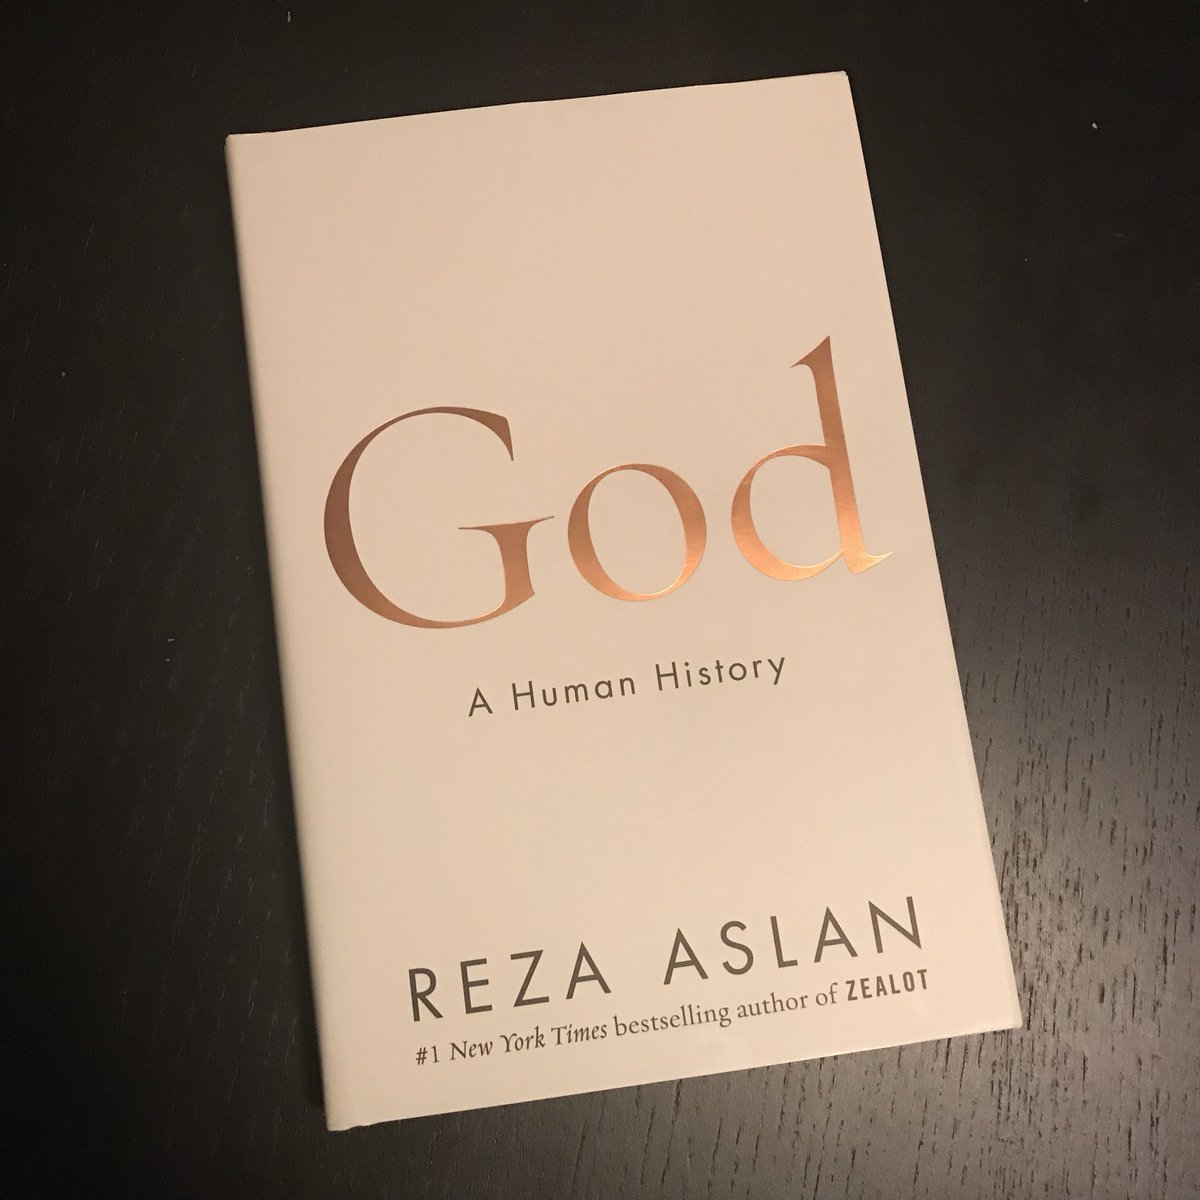 God A Human History A Rescue Attempt By Reza Aslan The Freethinker 23 November 2017 Council Of Ex Muslims Of Britain Cemb